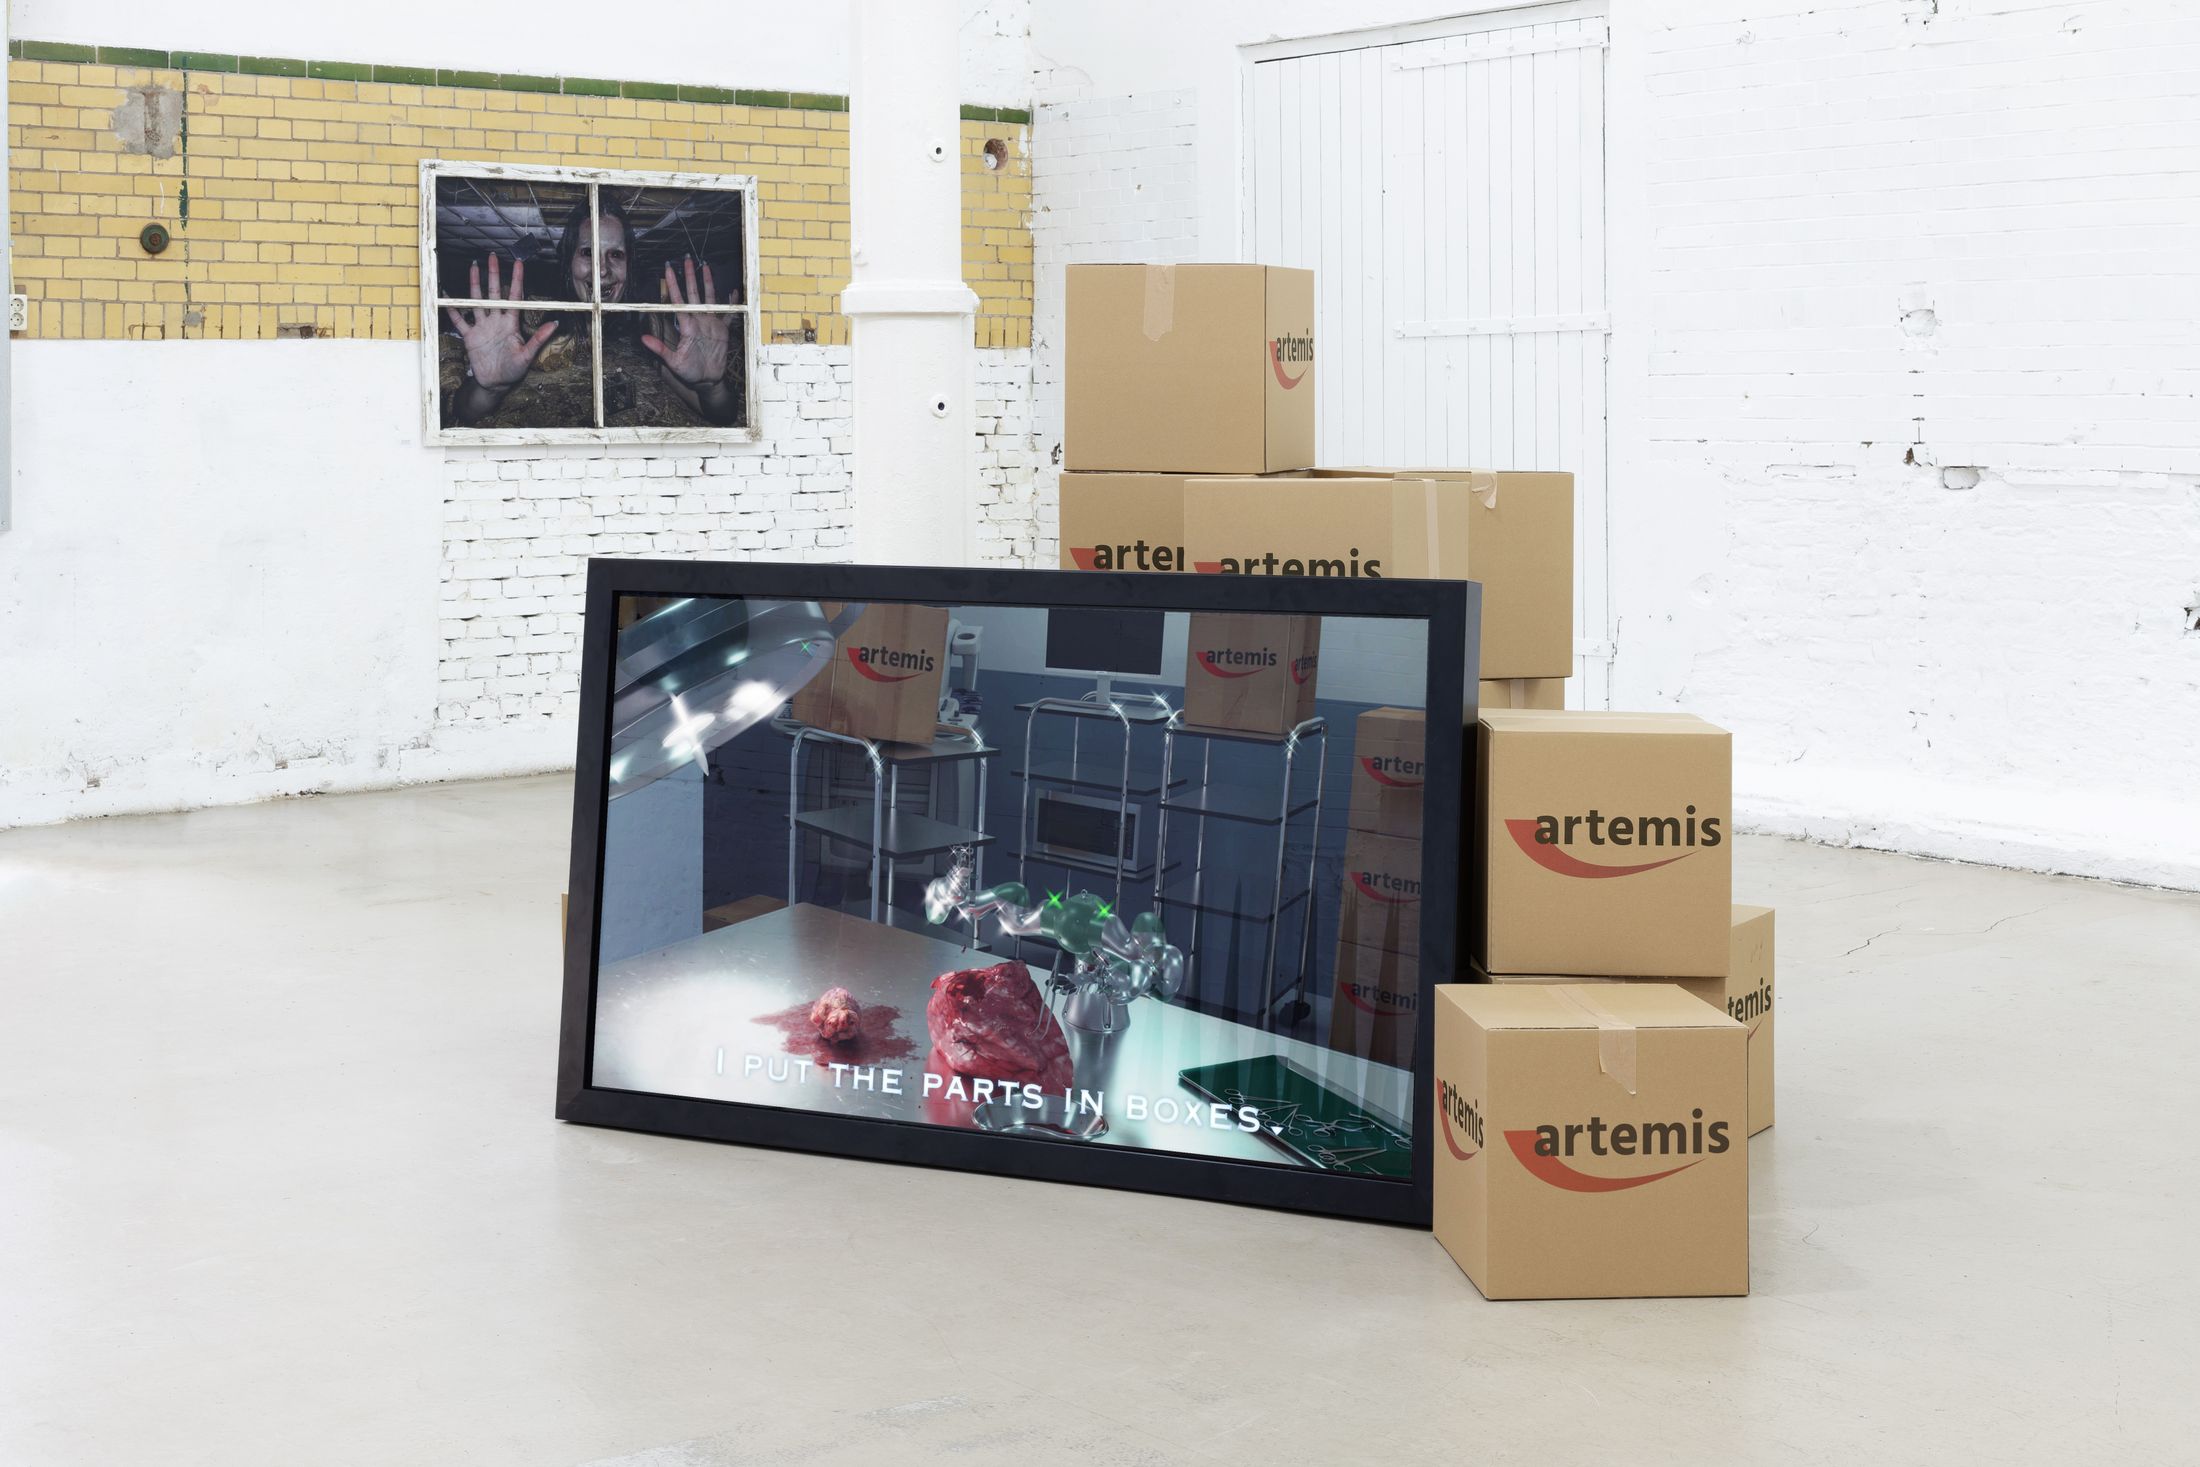 Installation view of Artemis (2023) by Melle Nieling, during the Bloodsport exhibition in Amsterdam